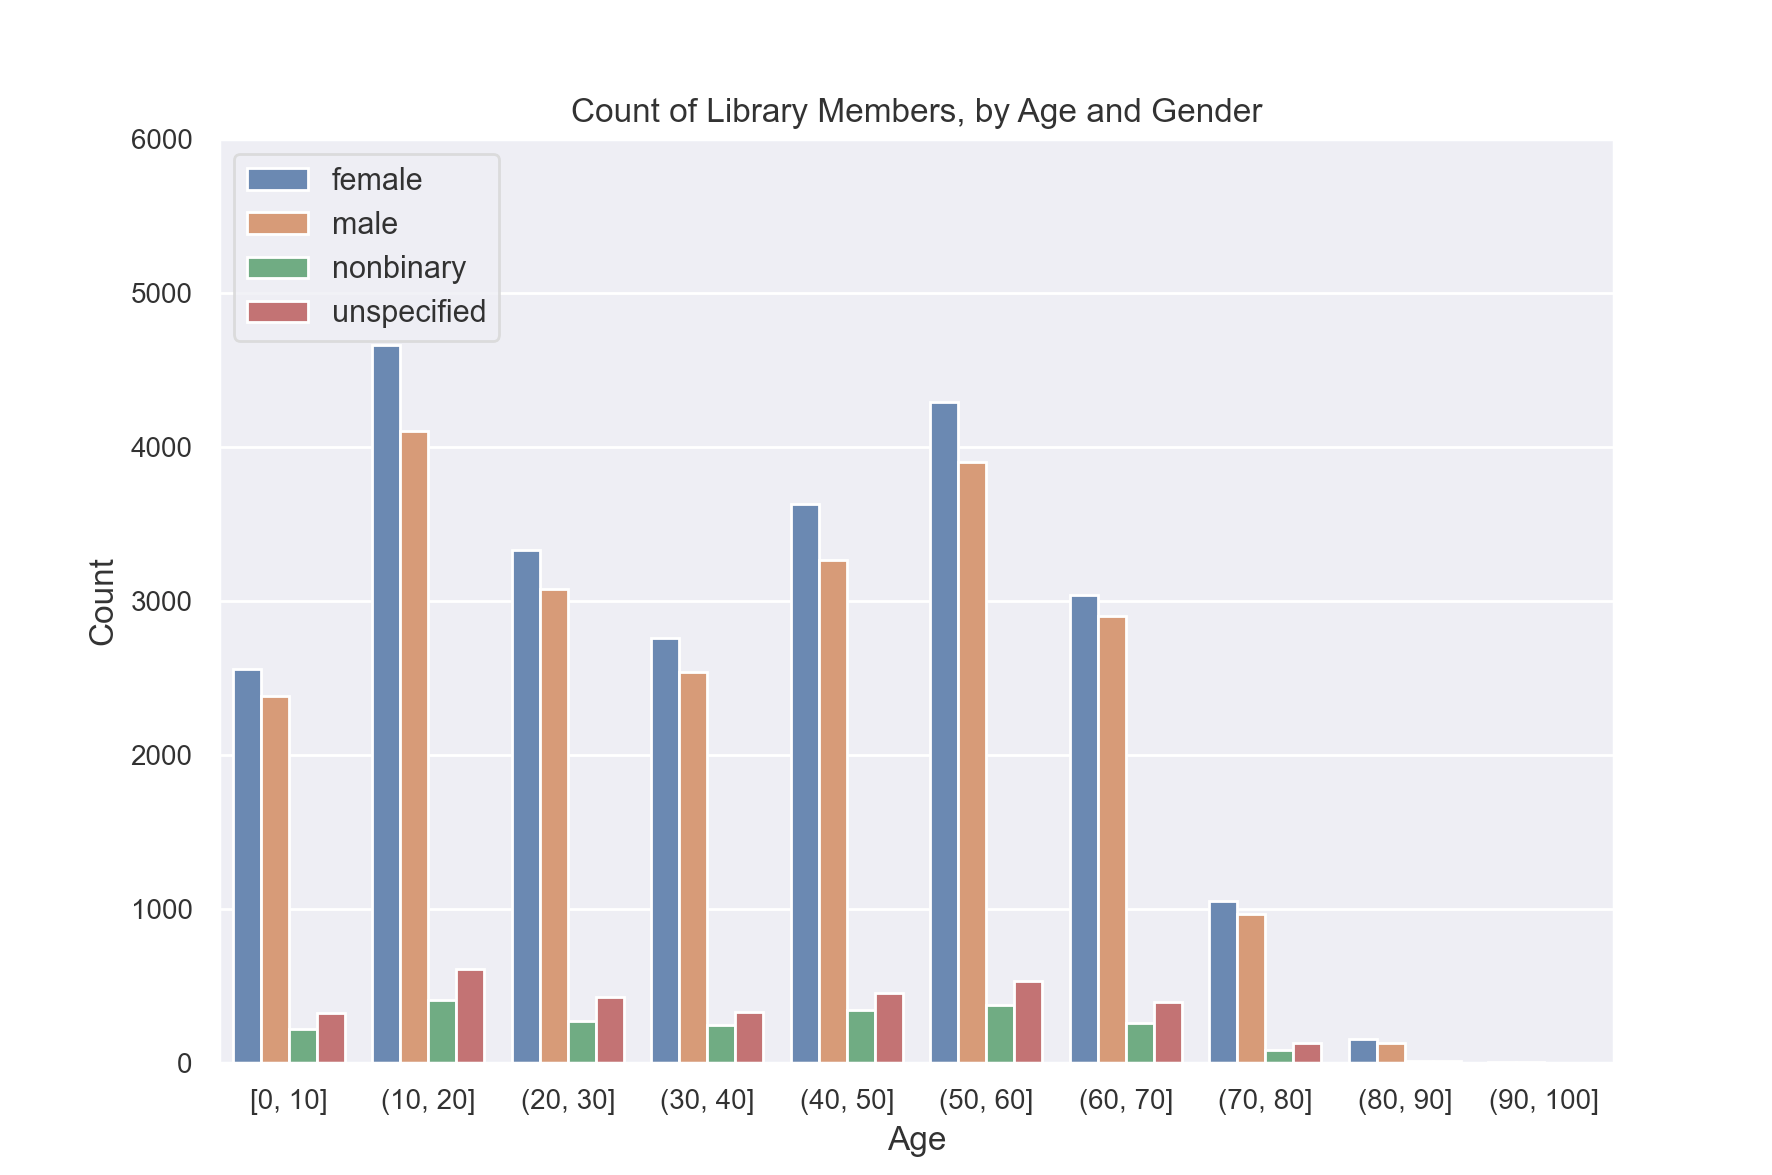 A bar chart plotting the count of members by each age bin and gender. The chart is bimodal with peaks at 10-19 and 50-59 with no significant interaction between age and gender.